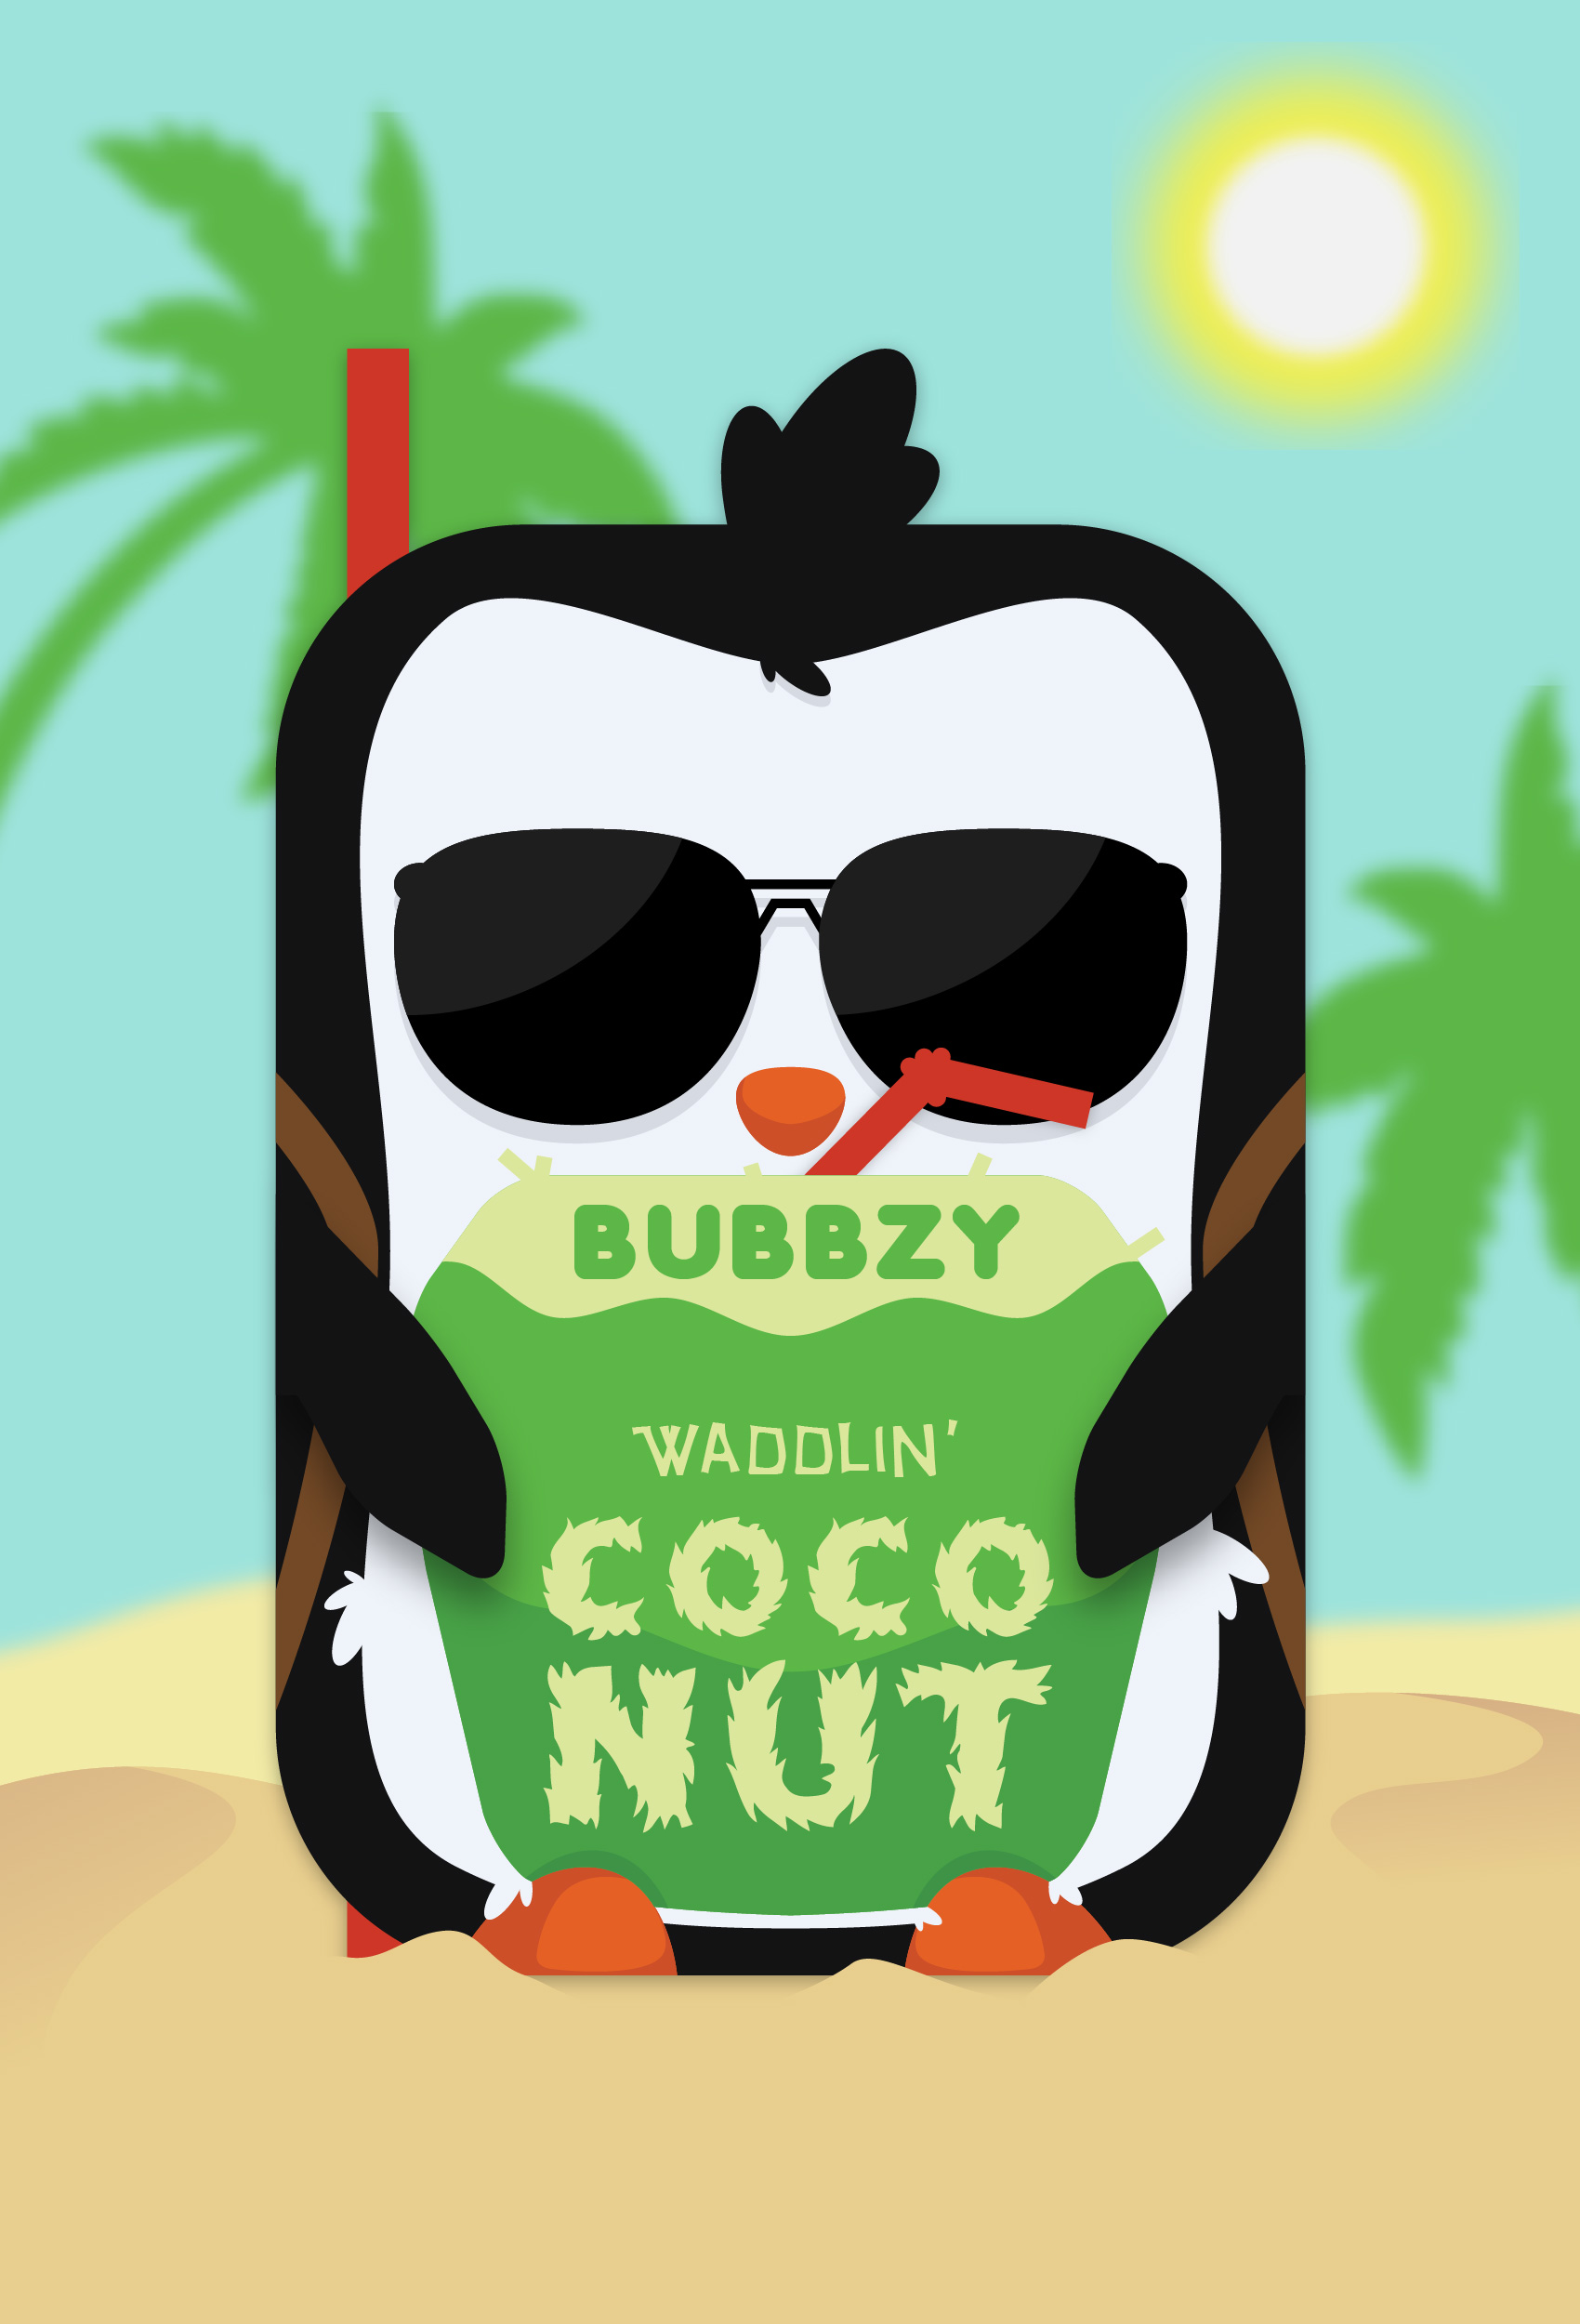 An image of Bubbzy's package design